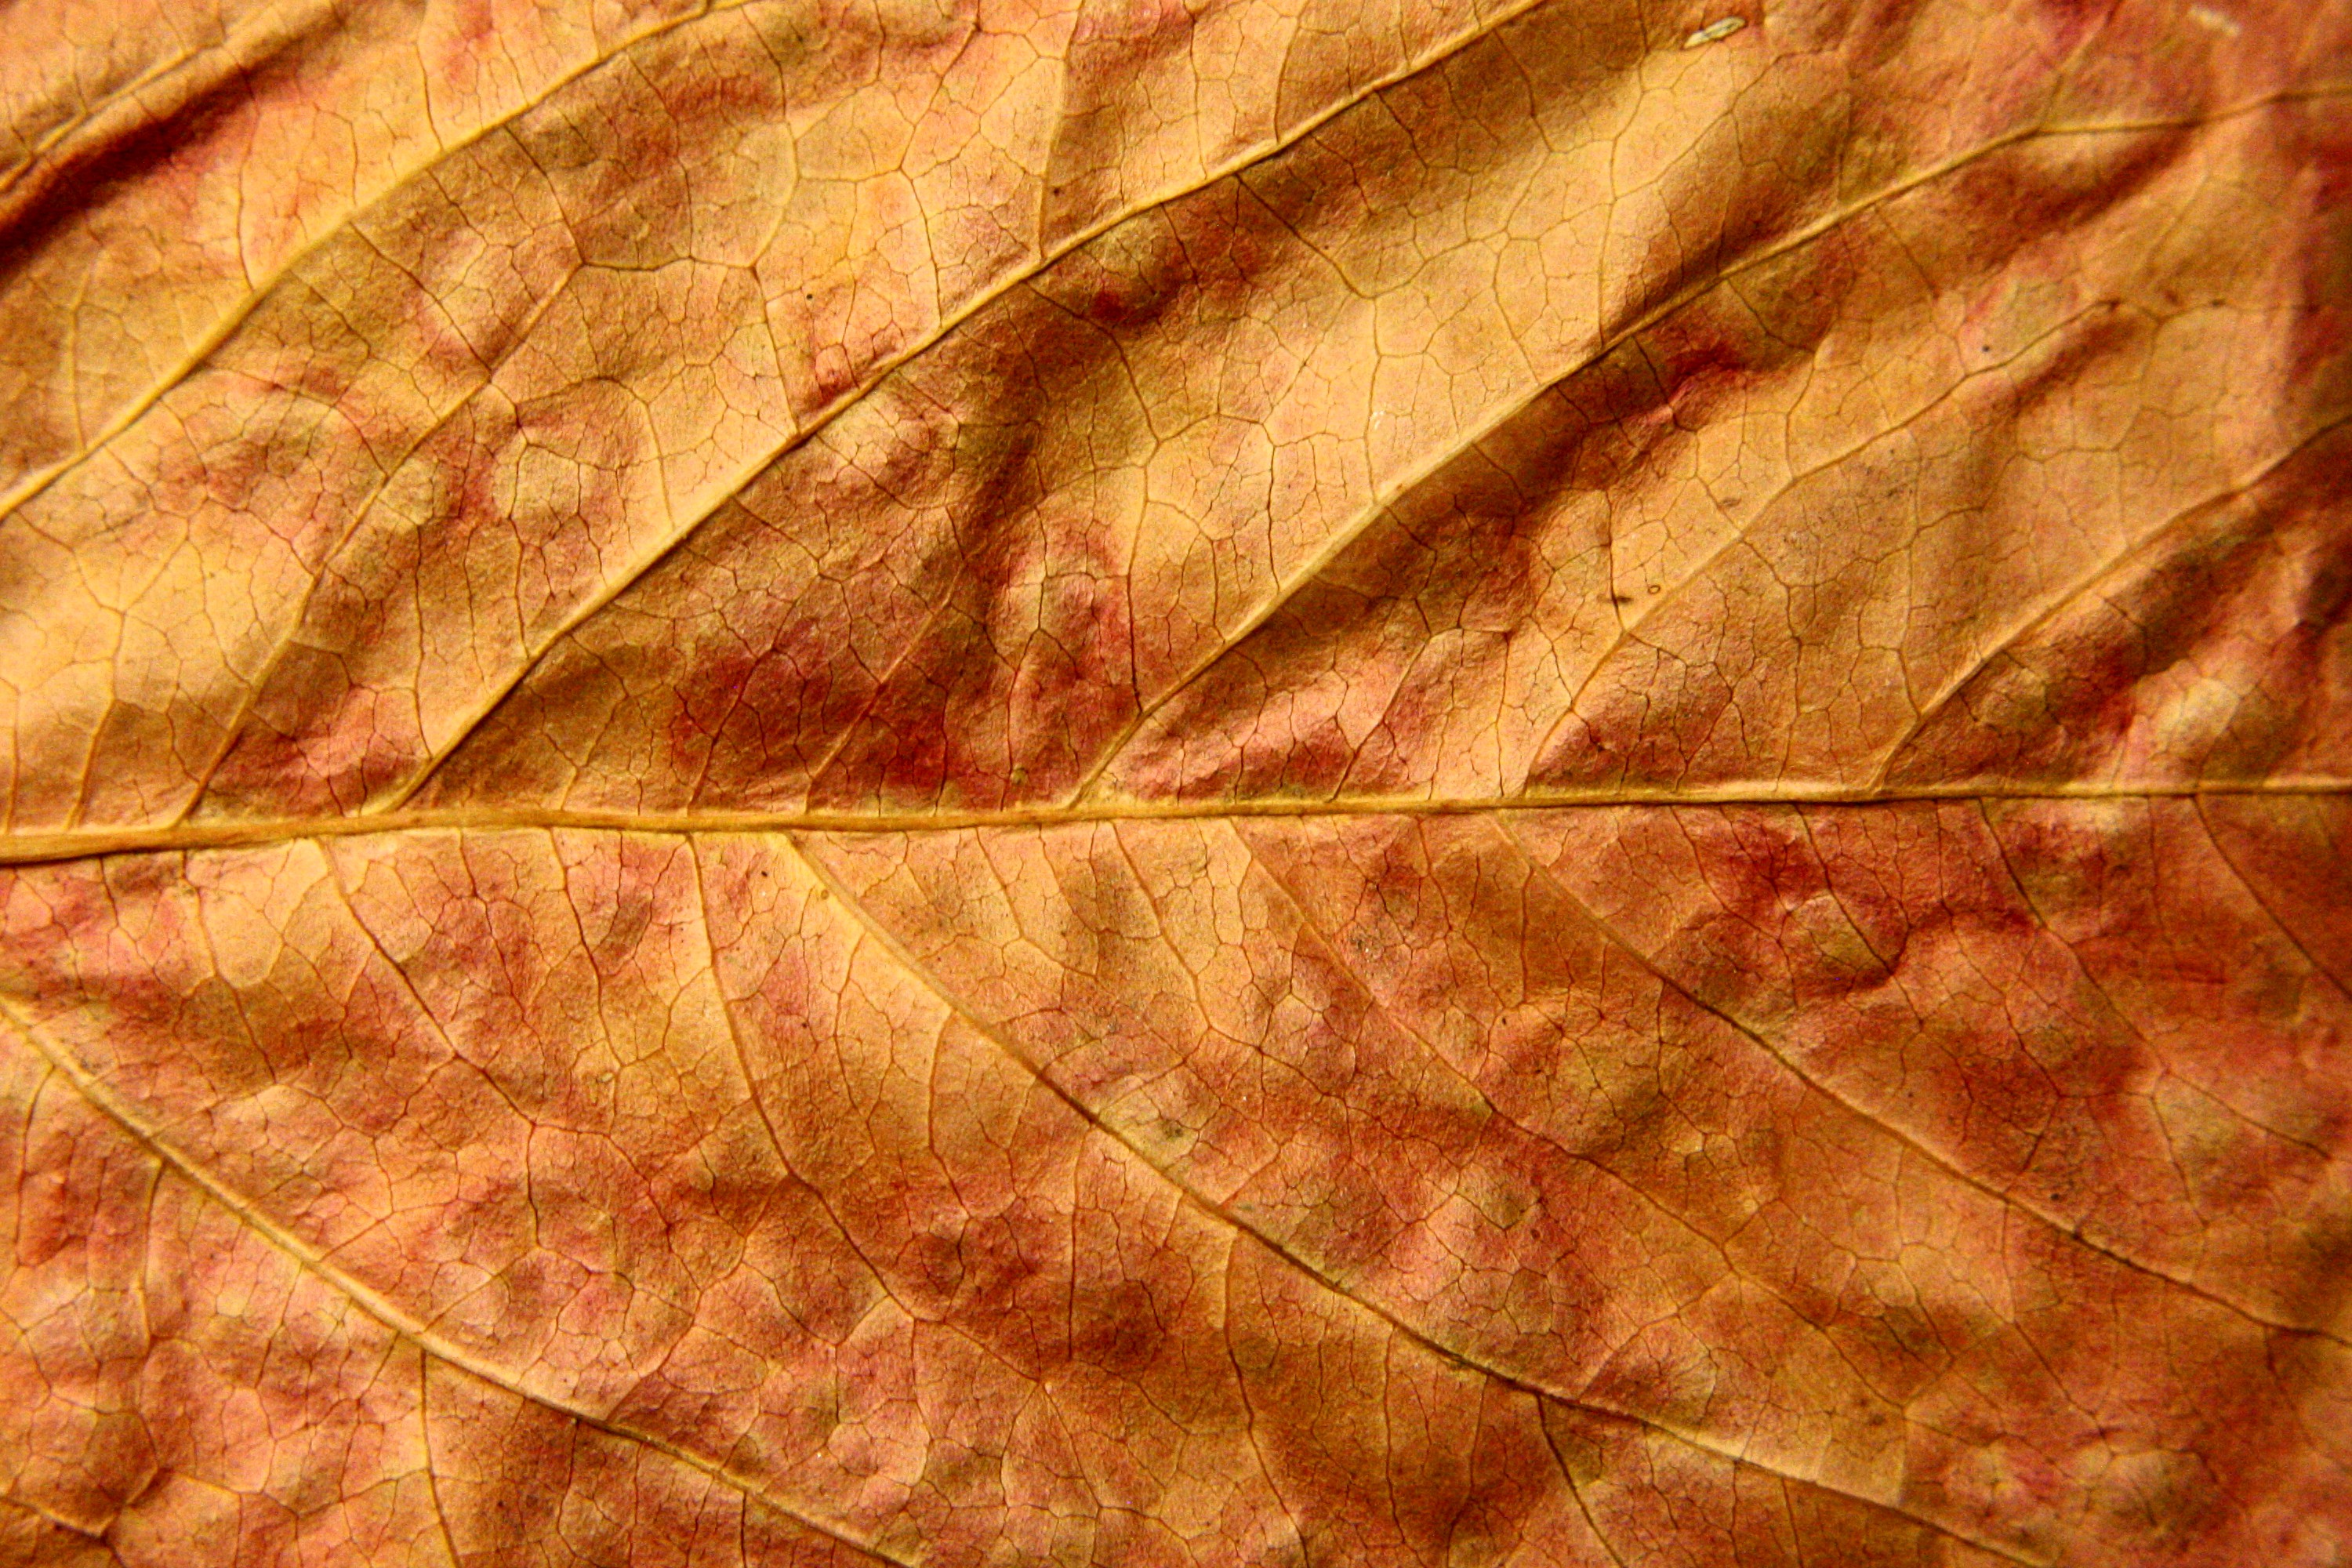 Dried Fall Leaf Close Up Texture Picture | Free Photograph | Photos ...